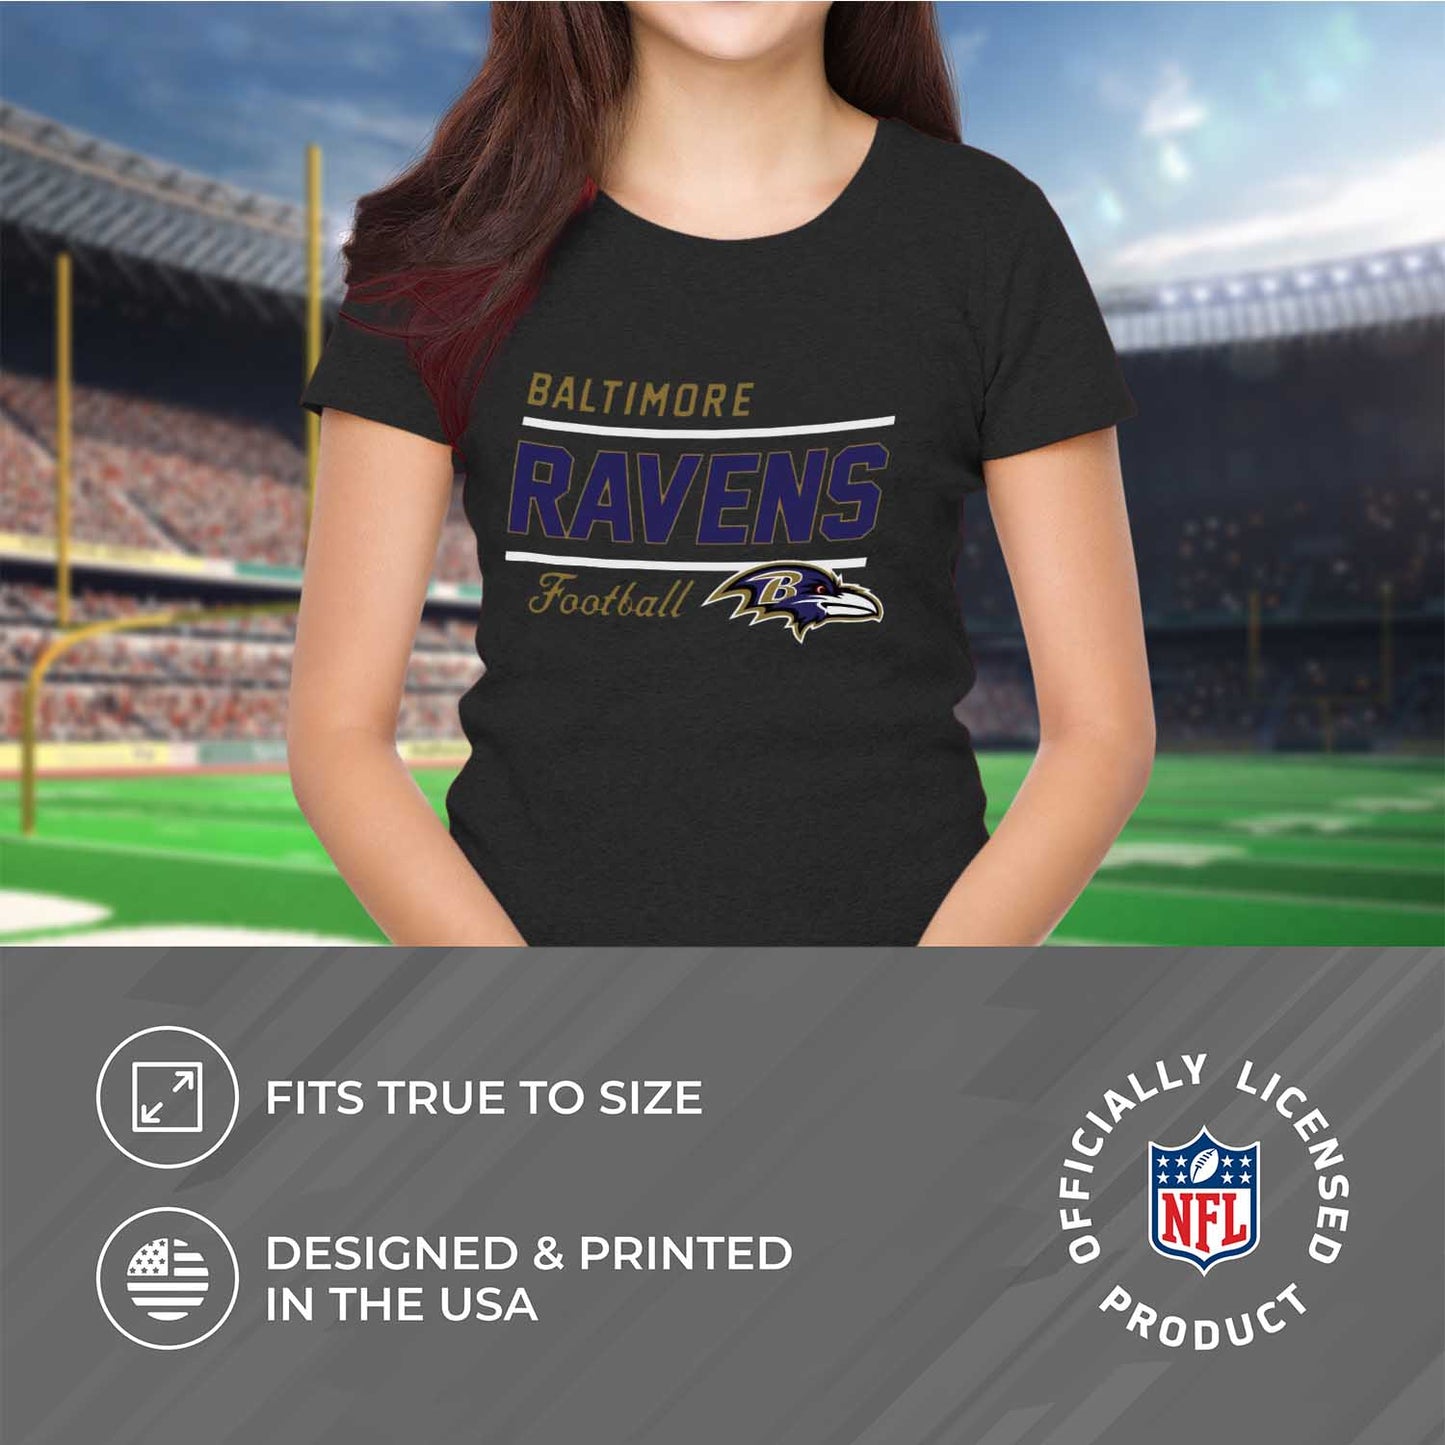 Baltimore Ravens NFL Gameday Women's Relaxed Fit T-shirt - Black